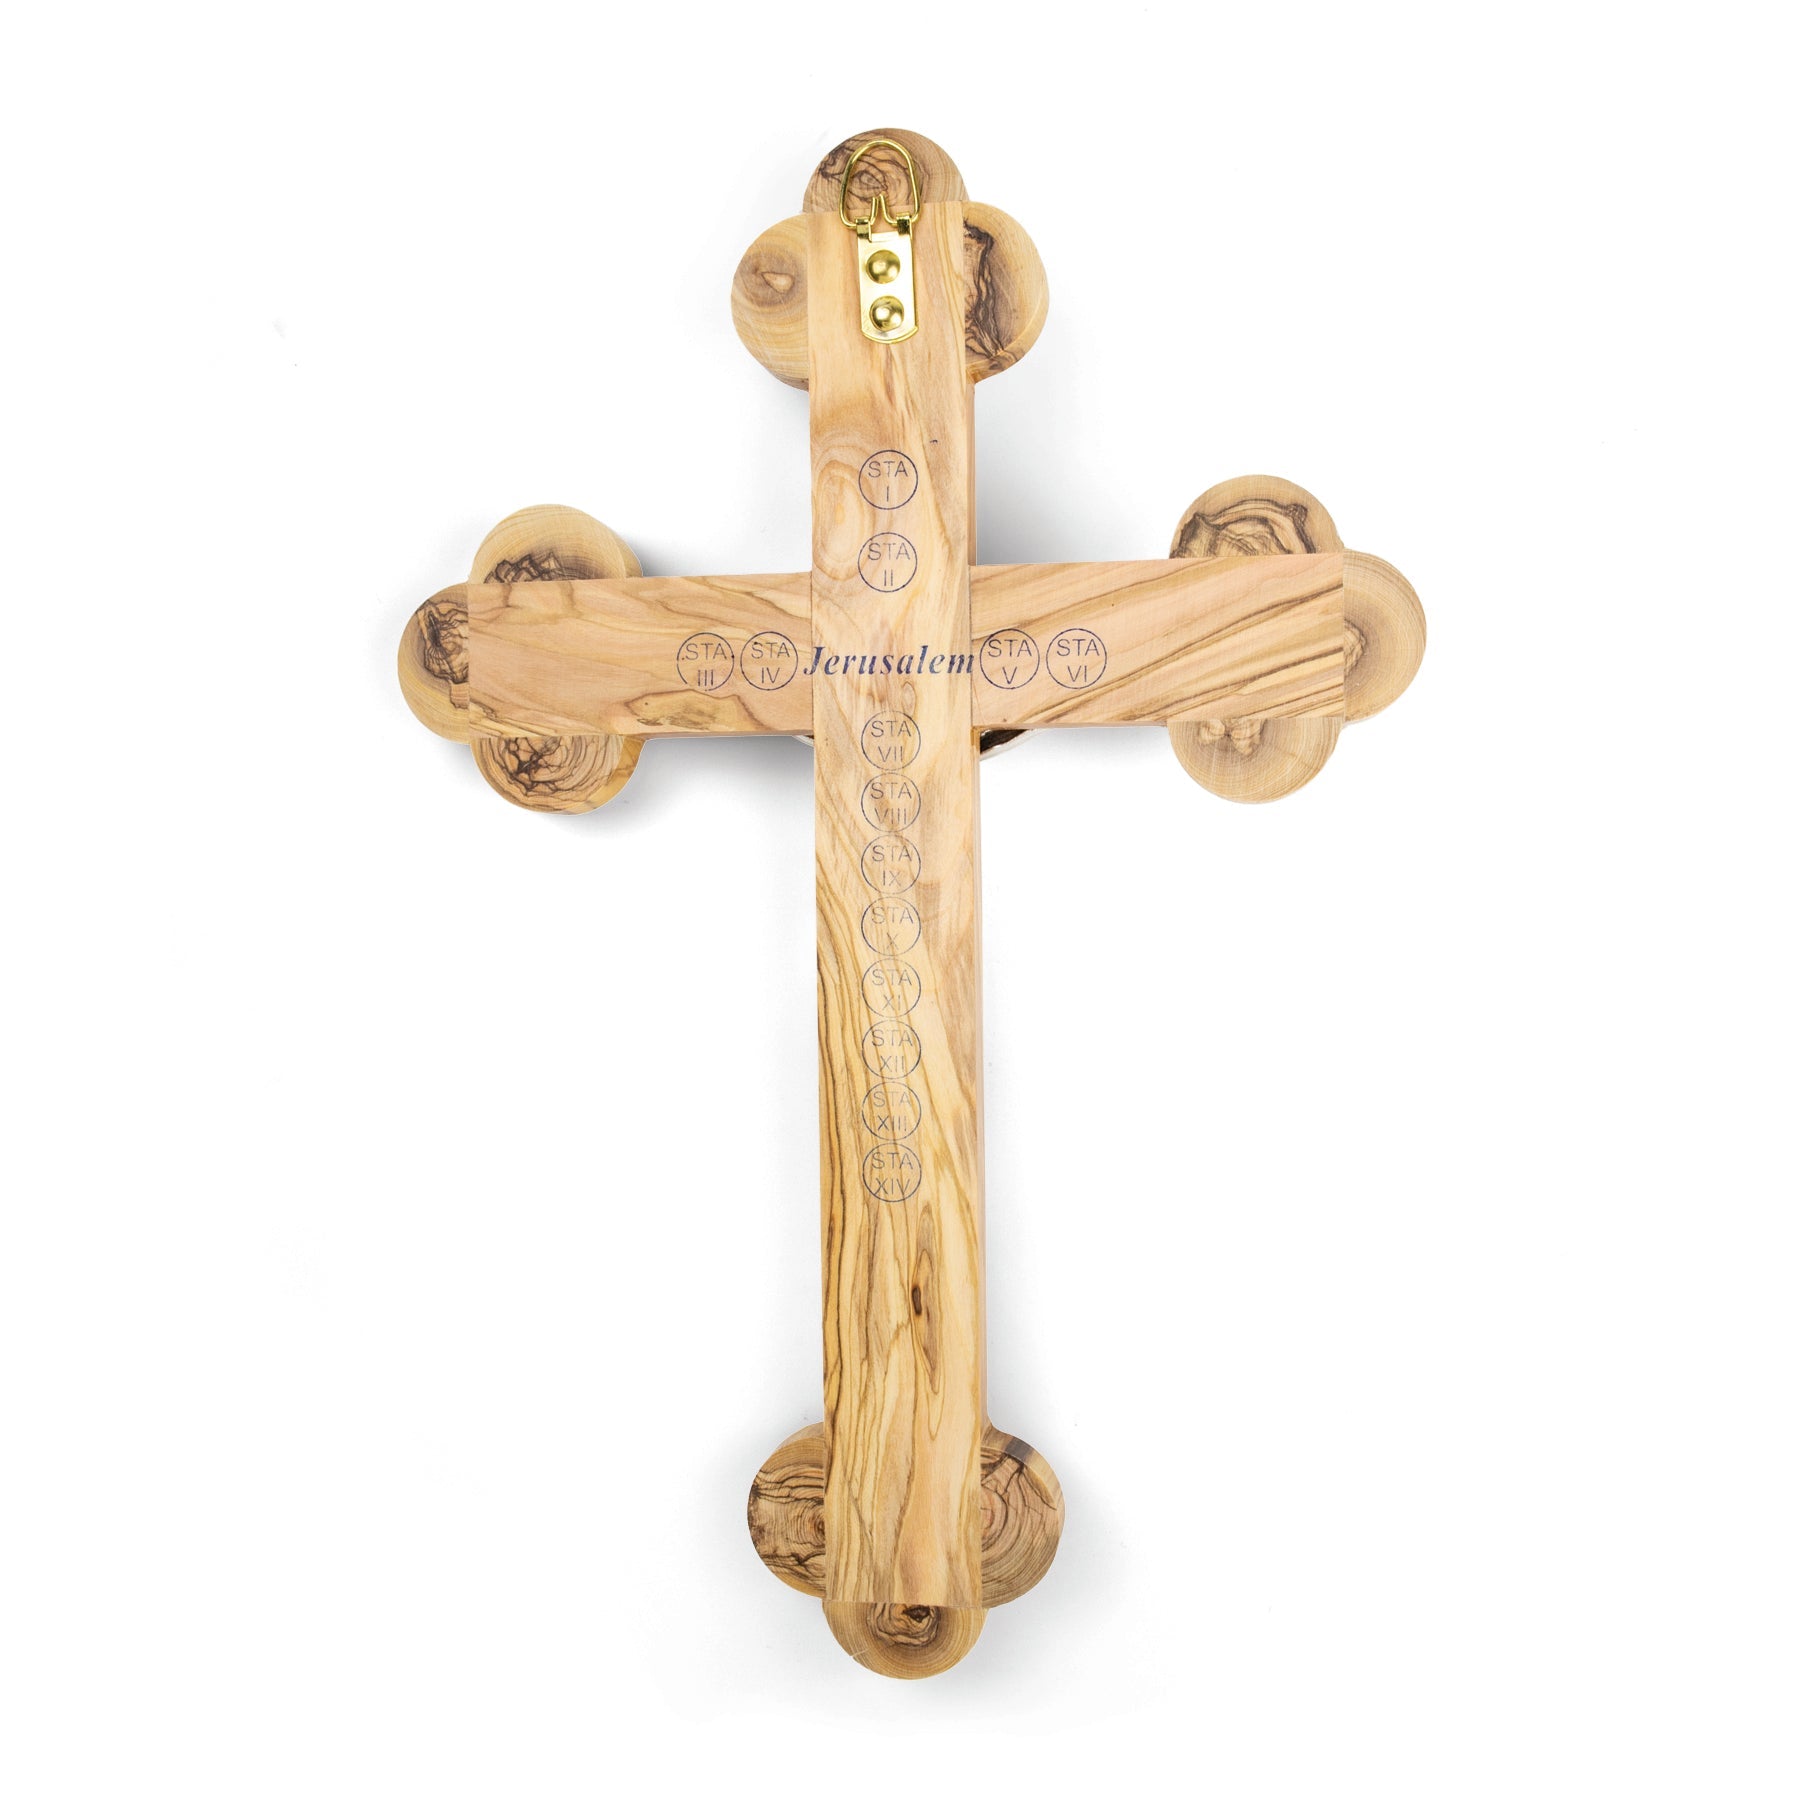 15" Olive Wood & Mother of Pearl Crucifix Wall Cross with Holy Land Elements